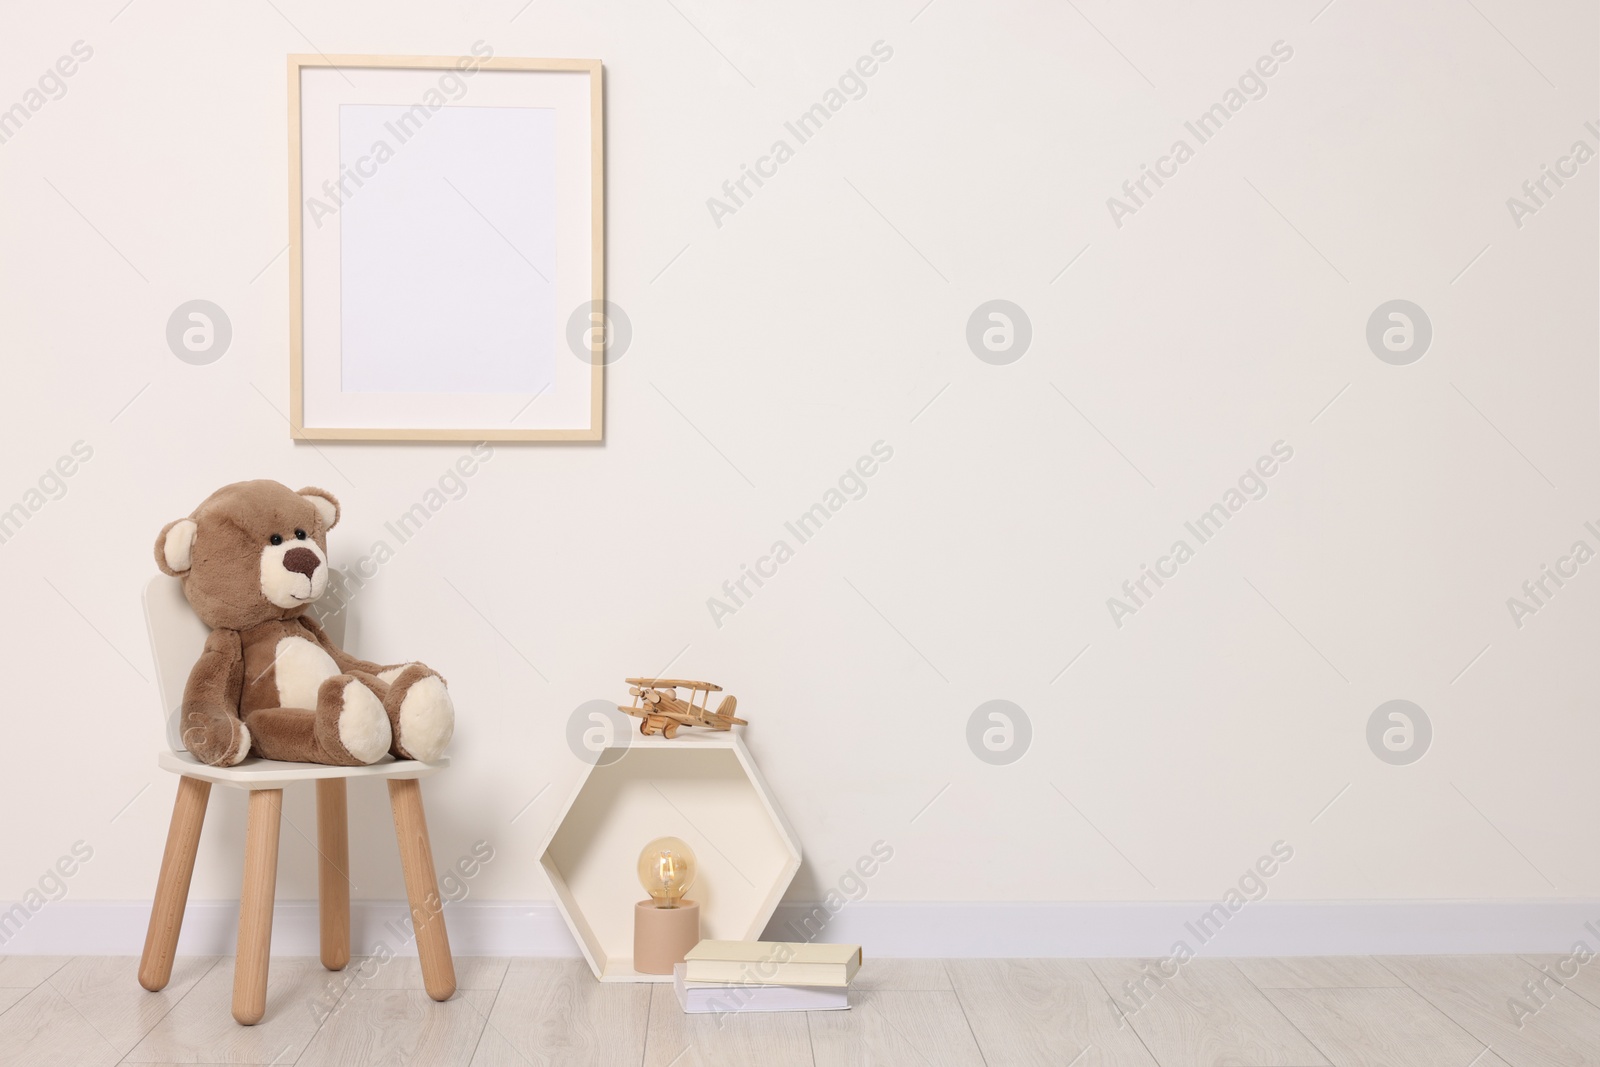 Photo of Beautiful children's room with light wall, furniture and toys, space for text. Interior design